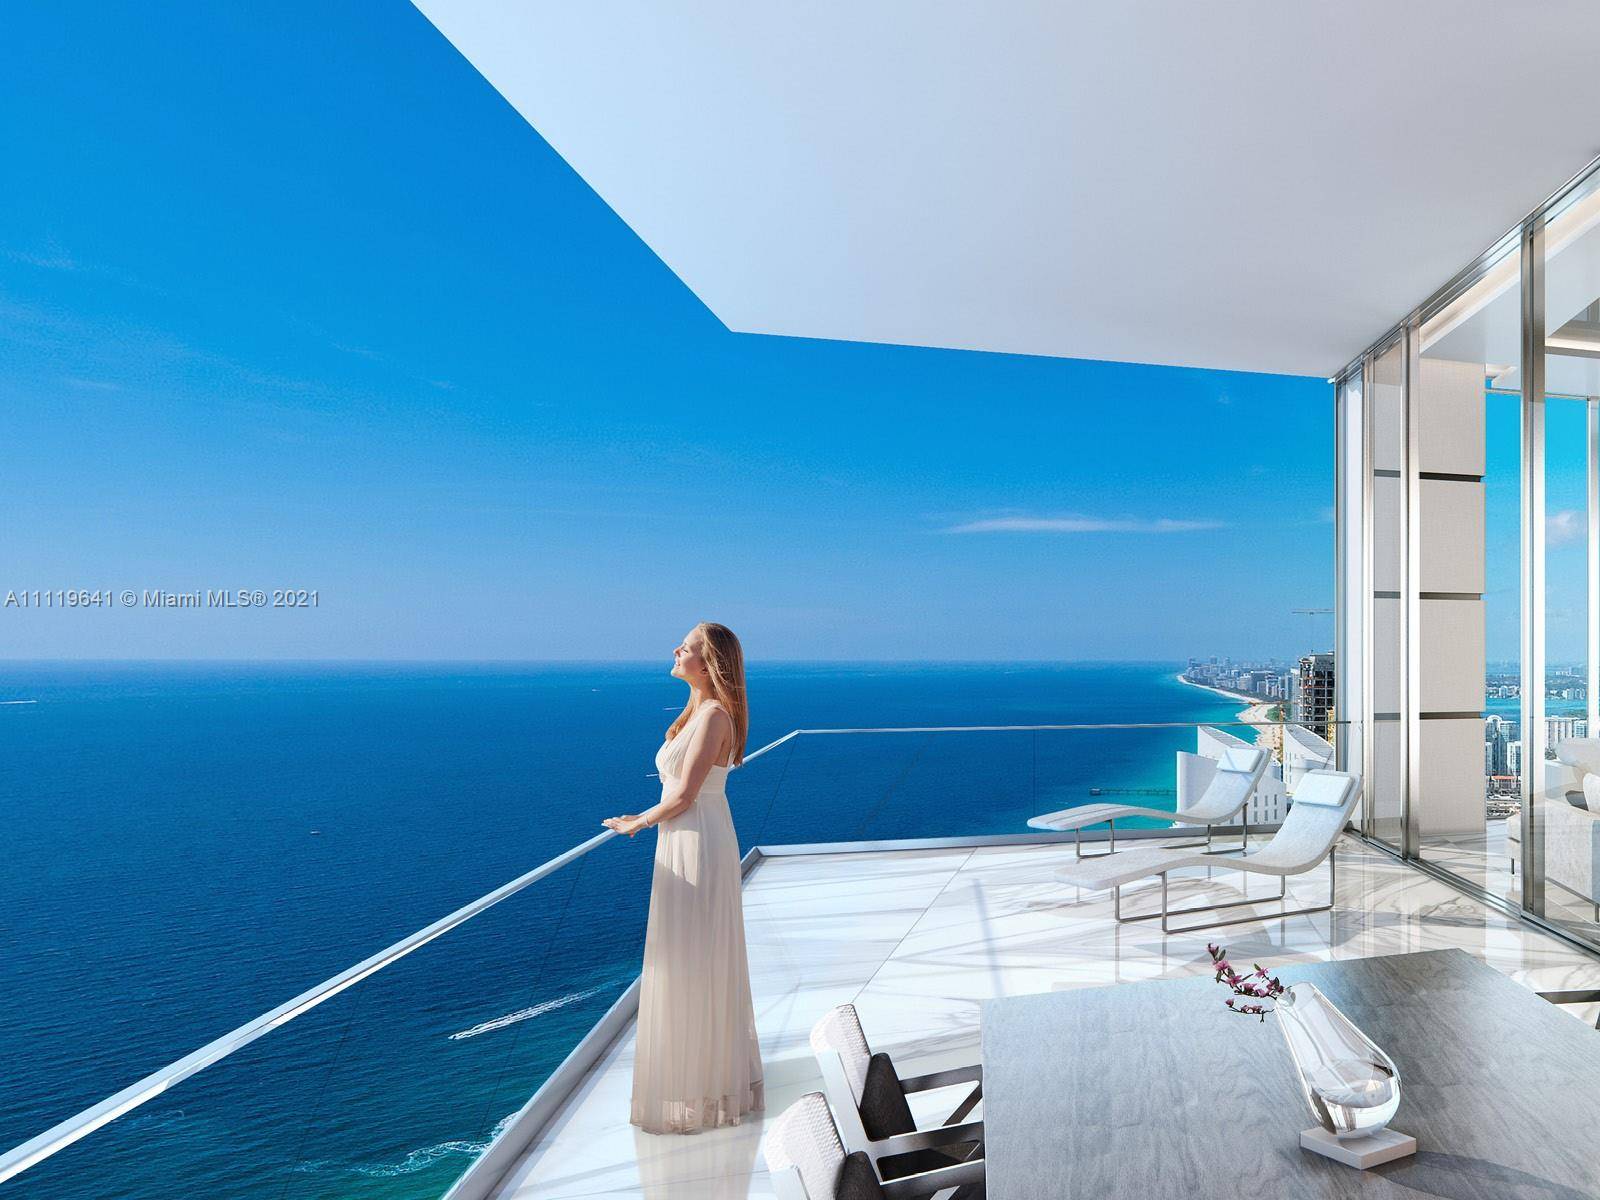 DEVELOPER INVENTORY DELIVERING SOON AWARD WINNING DESIGNER INTERIORS BY STEVEN G DELIVERS A ONE OF A KIND OCEANFRONT TOWER SUITE PENTHOUSE.